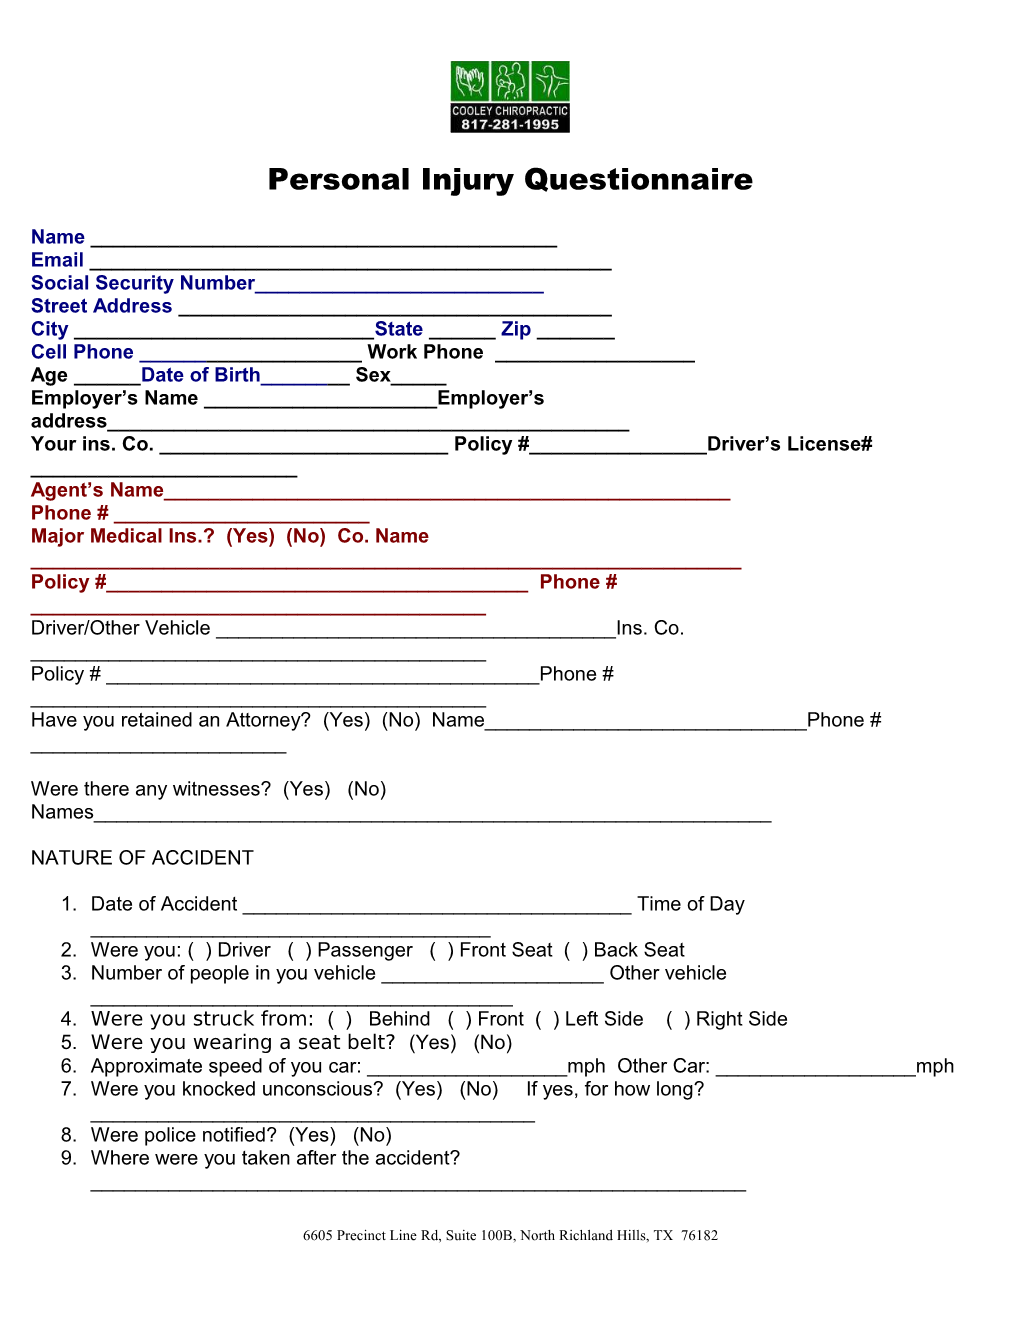 Personal Injury Questionnaire s1